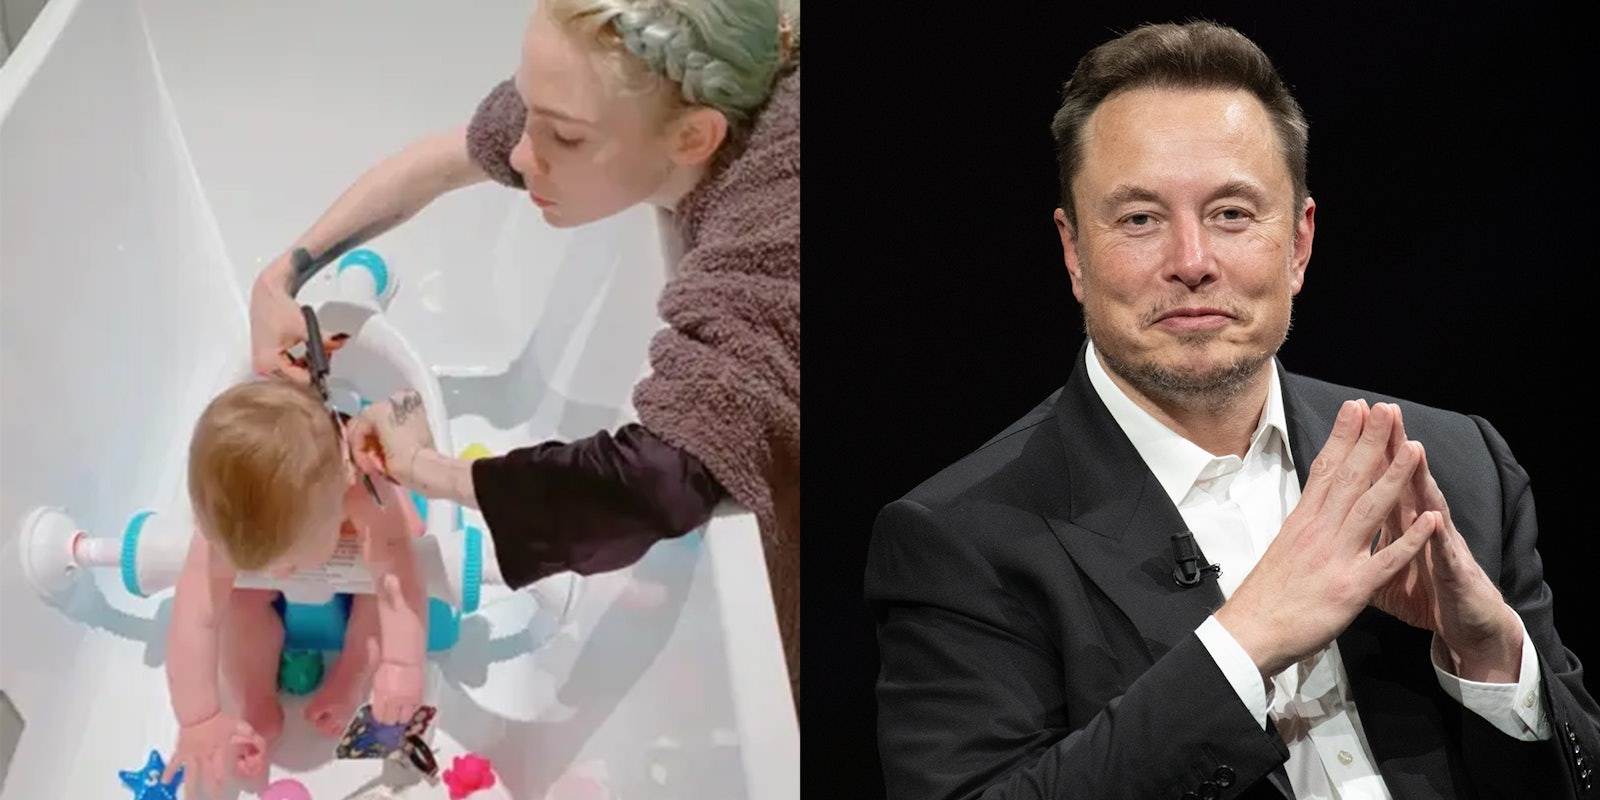 Grimes posts, then deletes, tweet begging Elon Musk to let her see her son, respond to her lawyer